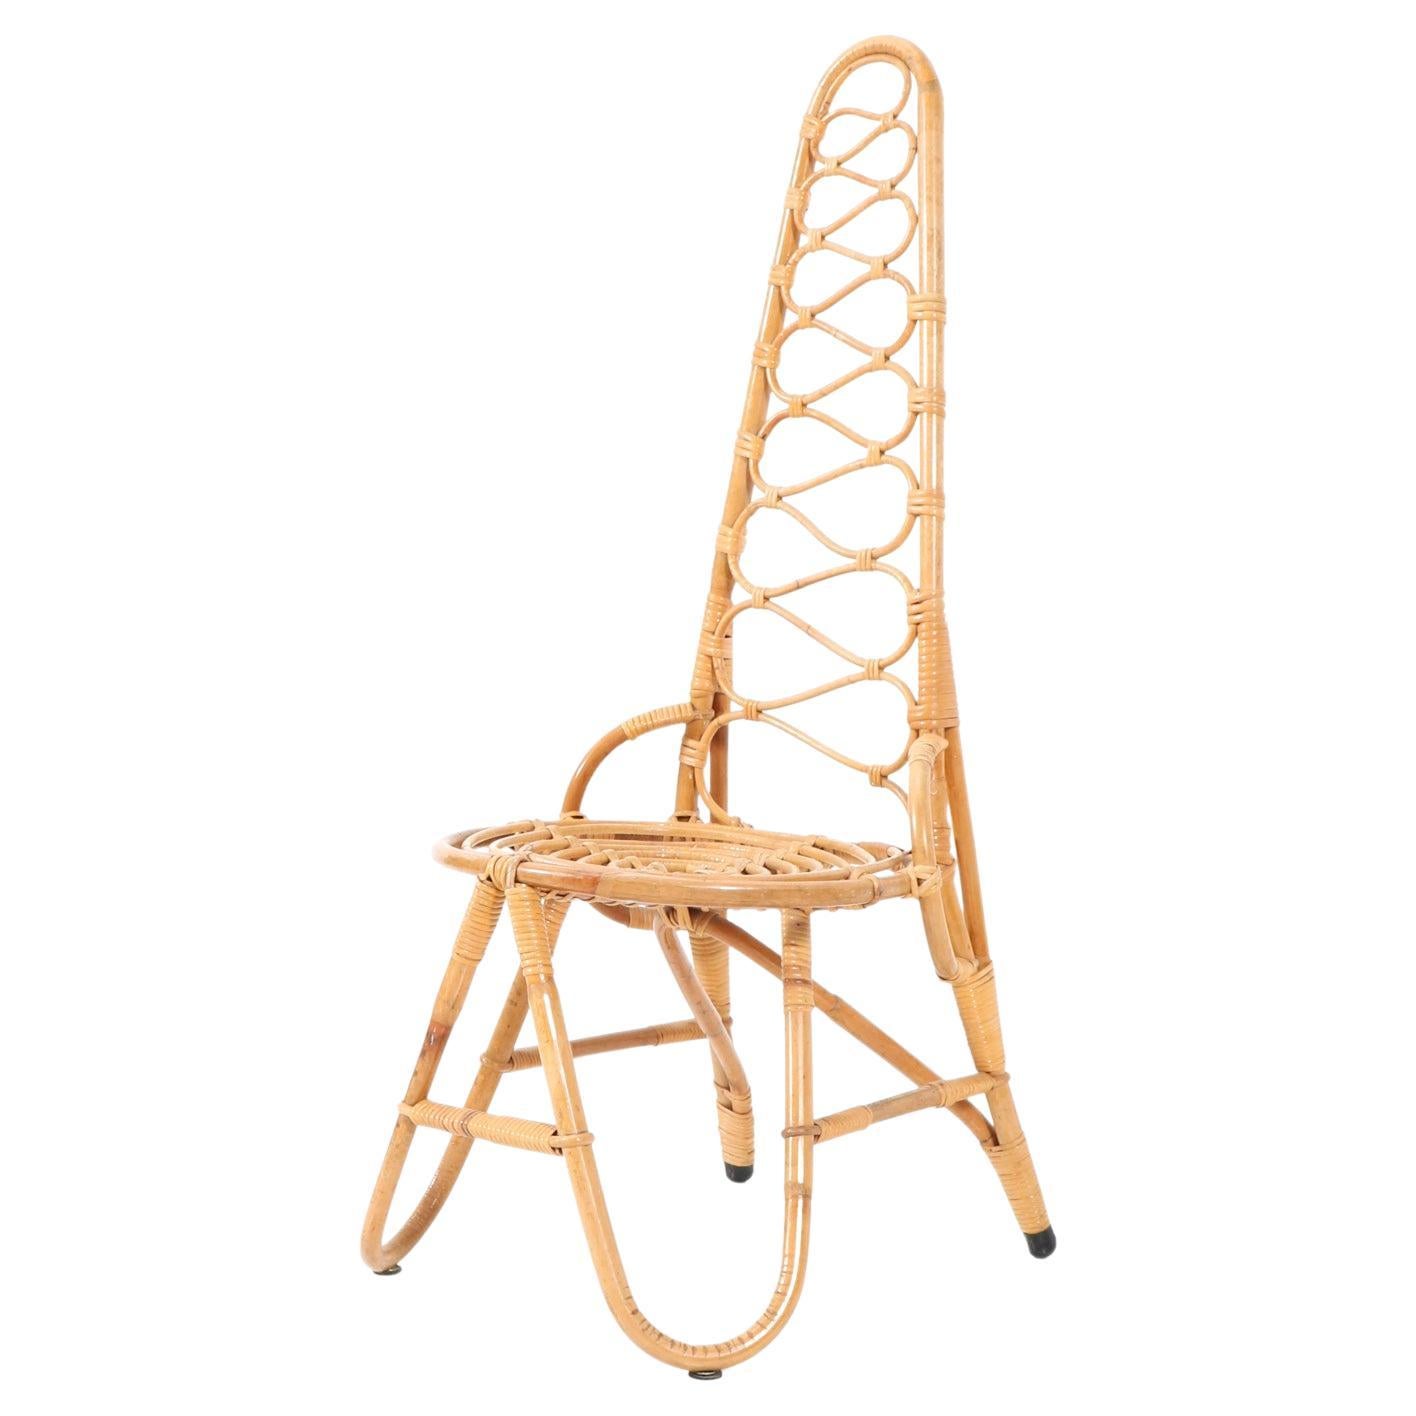 Mid-Century Modern Bamboo and Rattan Chair by Dirk van Sliedrecht for Rohe